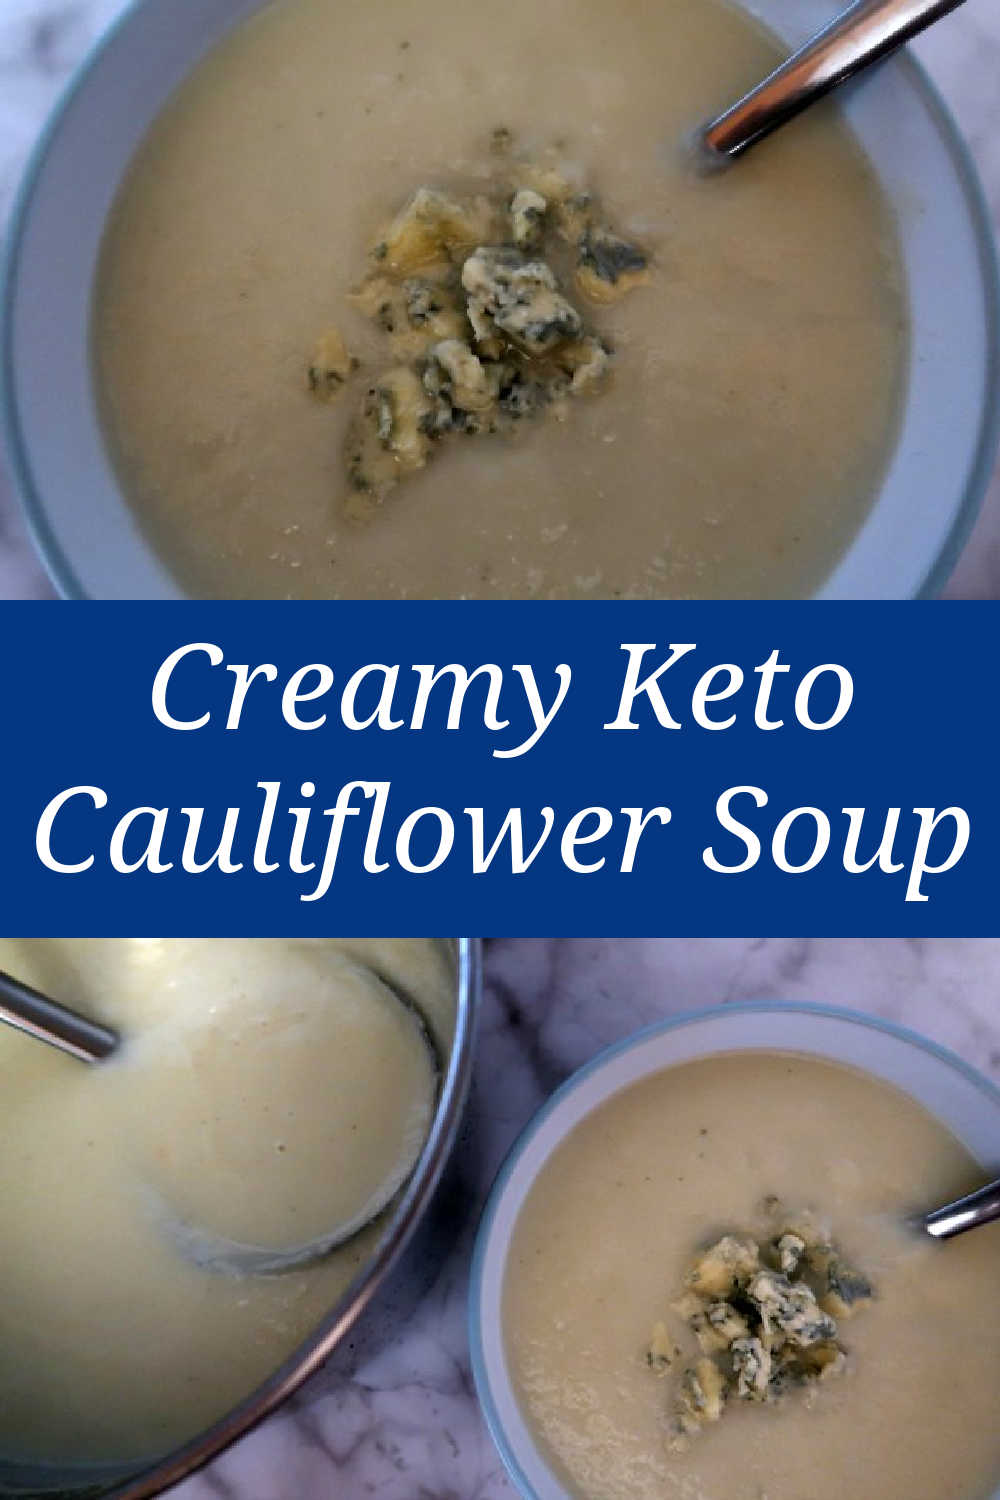 Keto Cauliflower Soup Recipe - How to make the best easy and creamy low carb friendly cheese loaded soup - with the video tutorial.